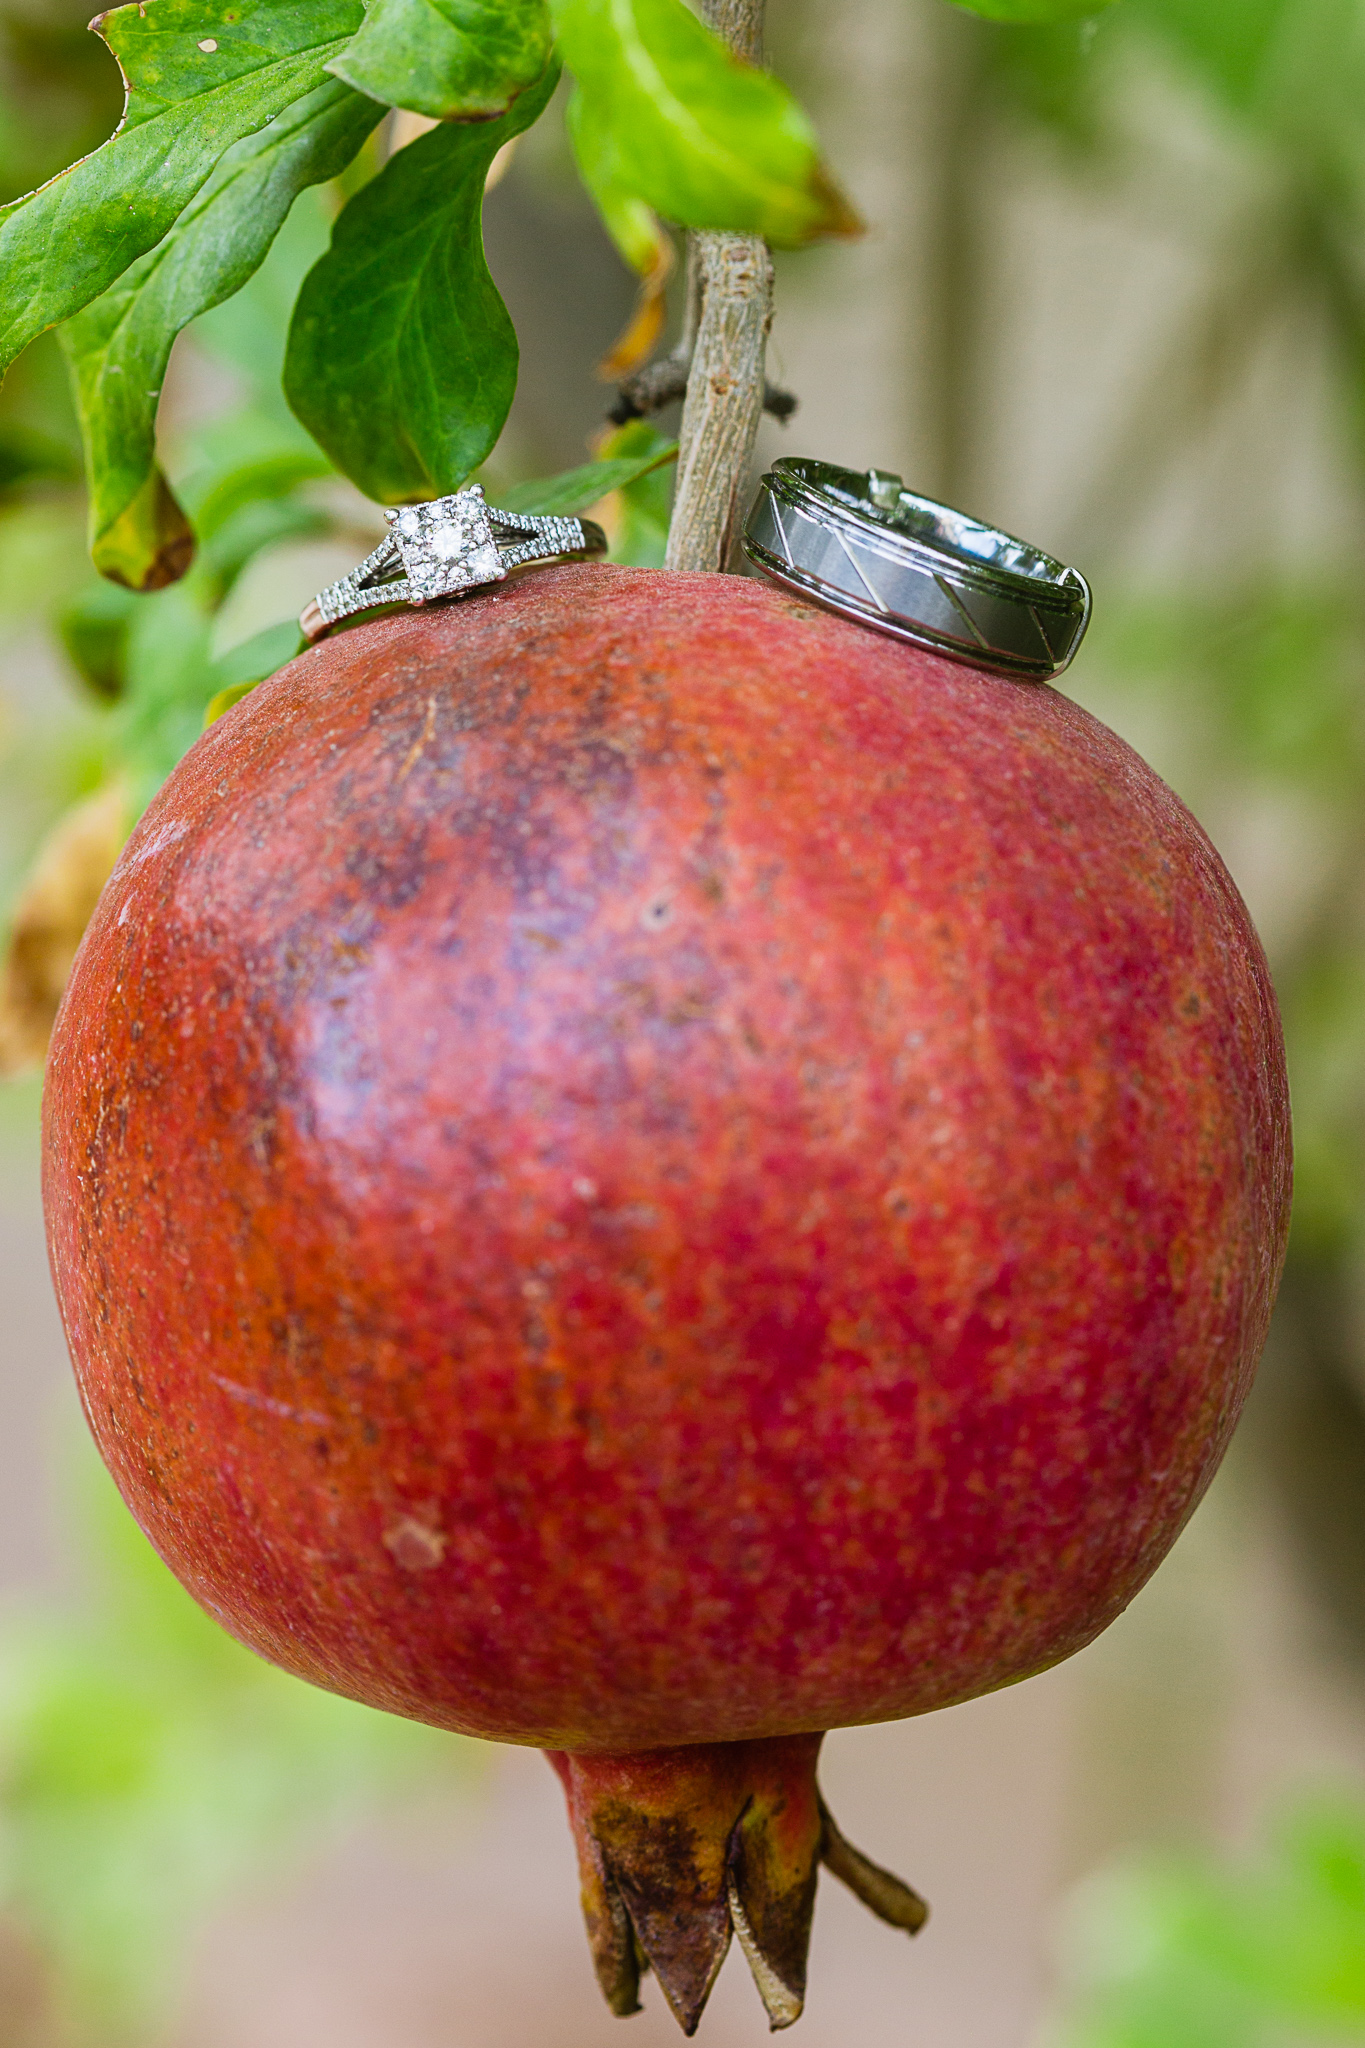 Wedding rings on top of a pomegranate by Phoenix wedding photographers PMA Photography.